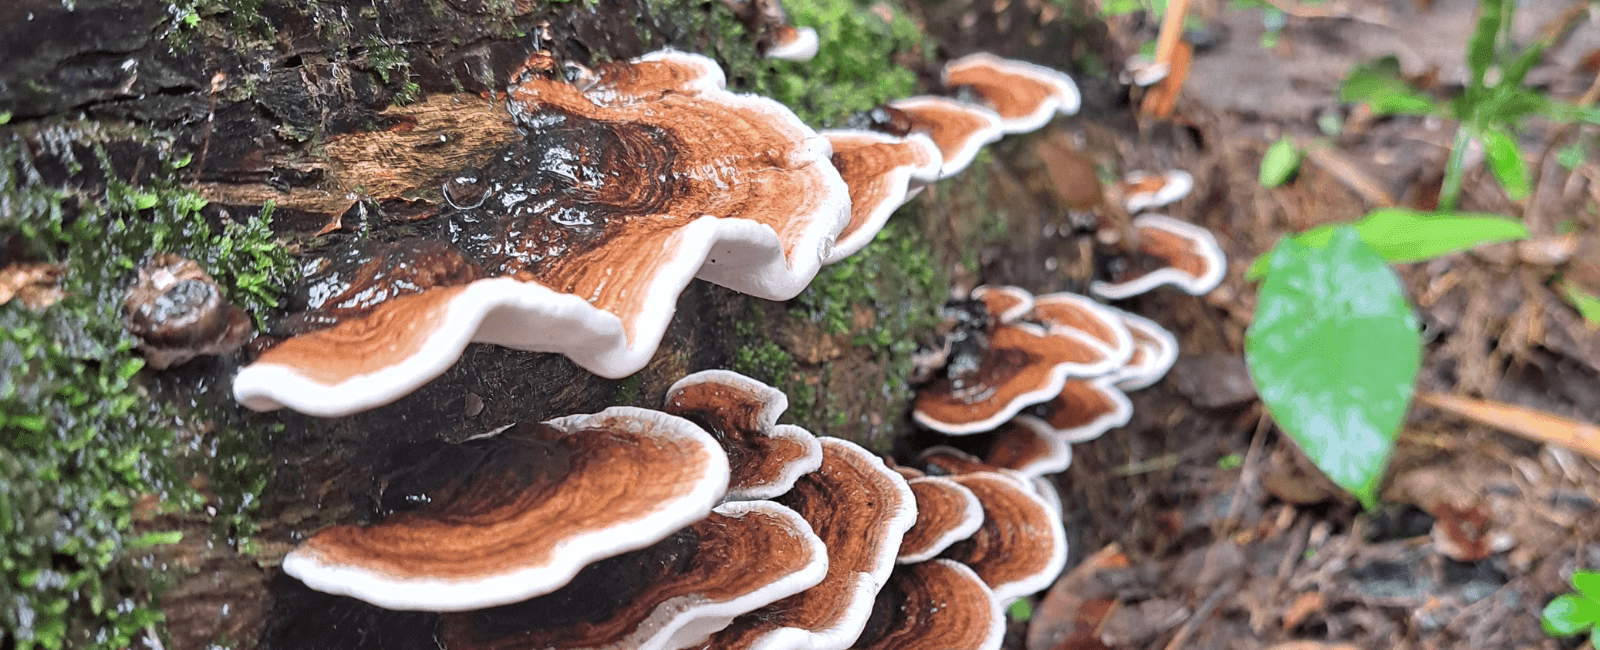 Medicinal Mushrooms Have the Potential to Treat Long COVID Symptoms